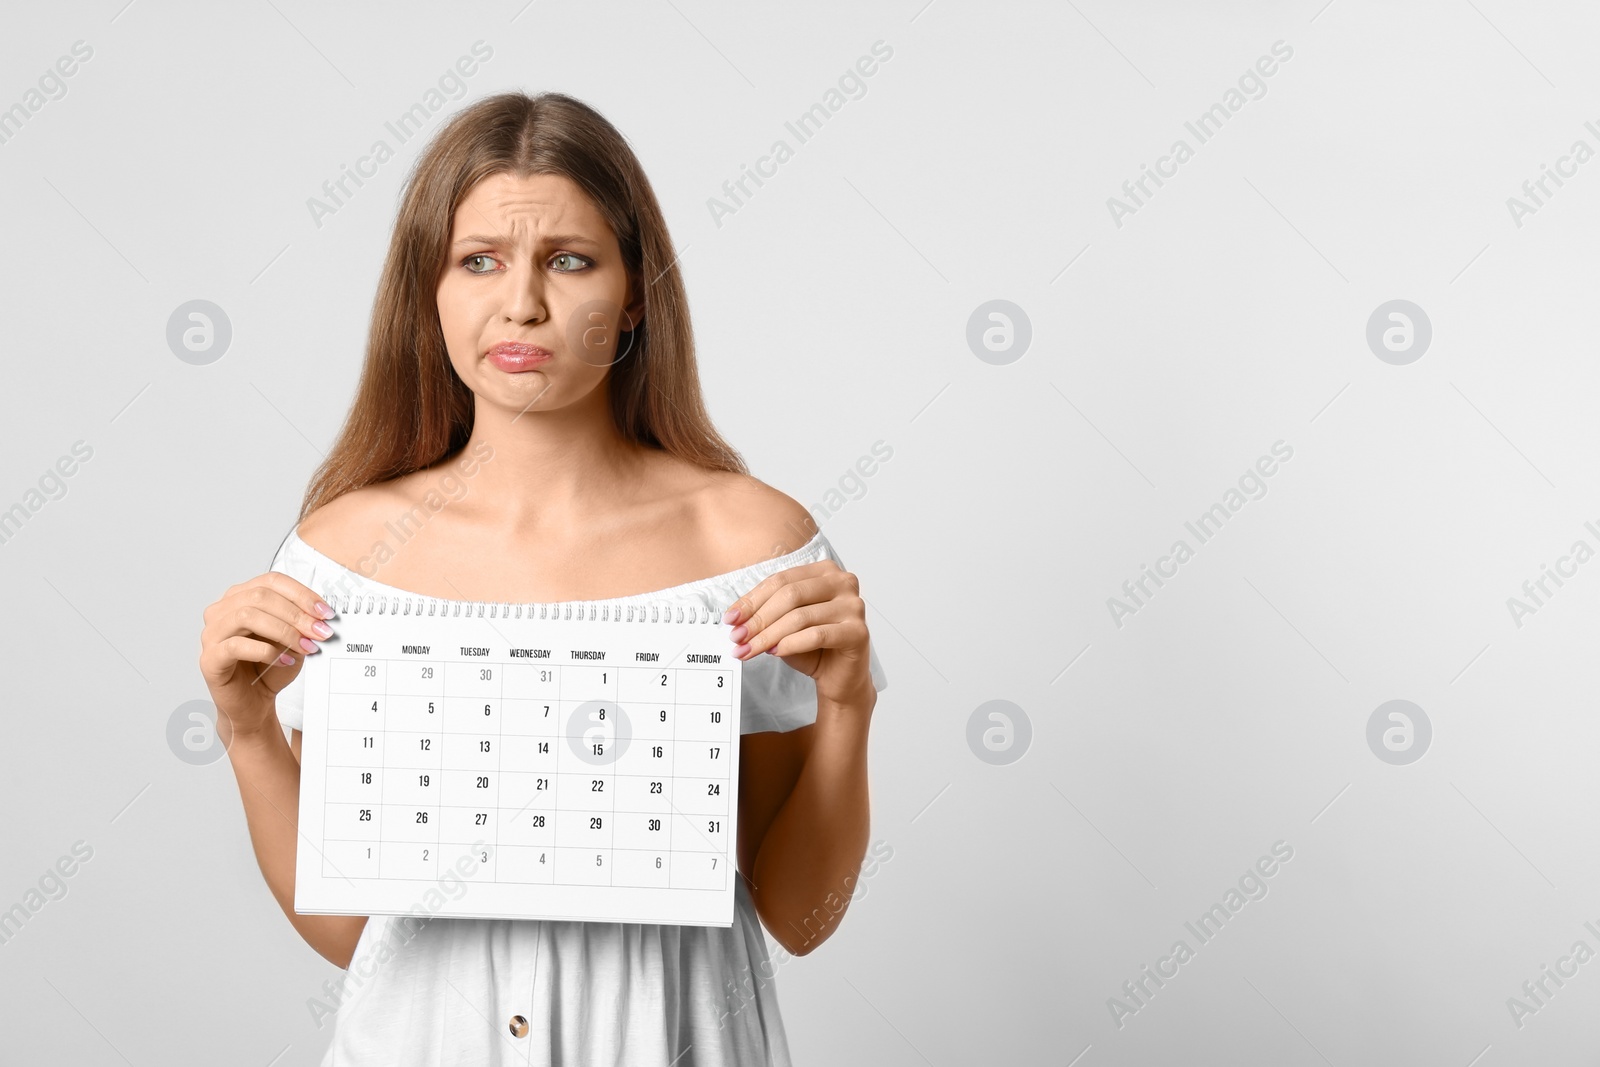 Photo of Emotional young woman holding calendar with marked menstrual cycle days on light background. Space for text